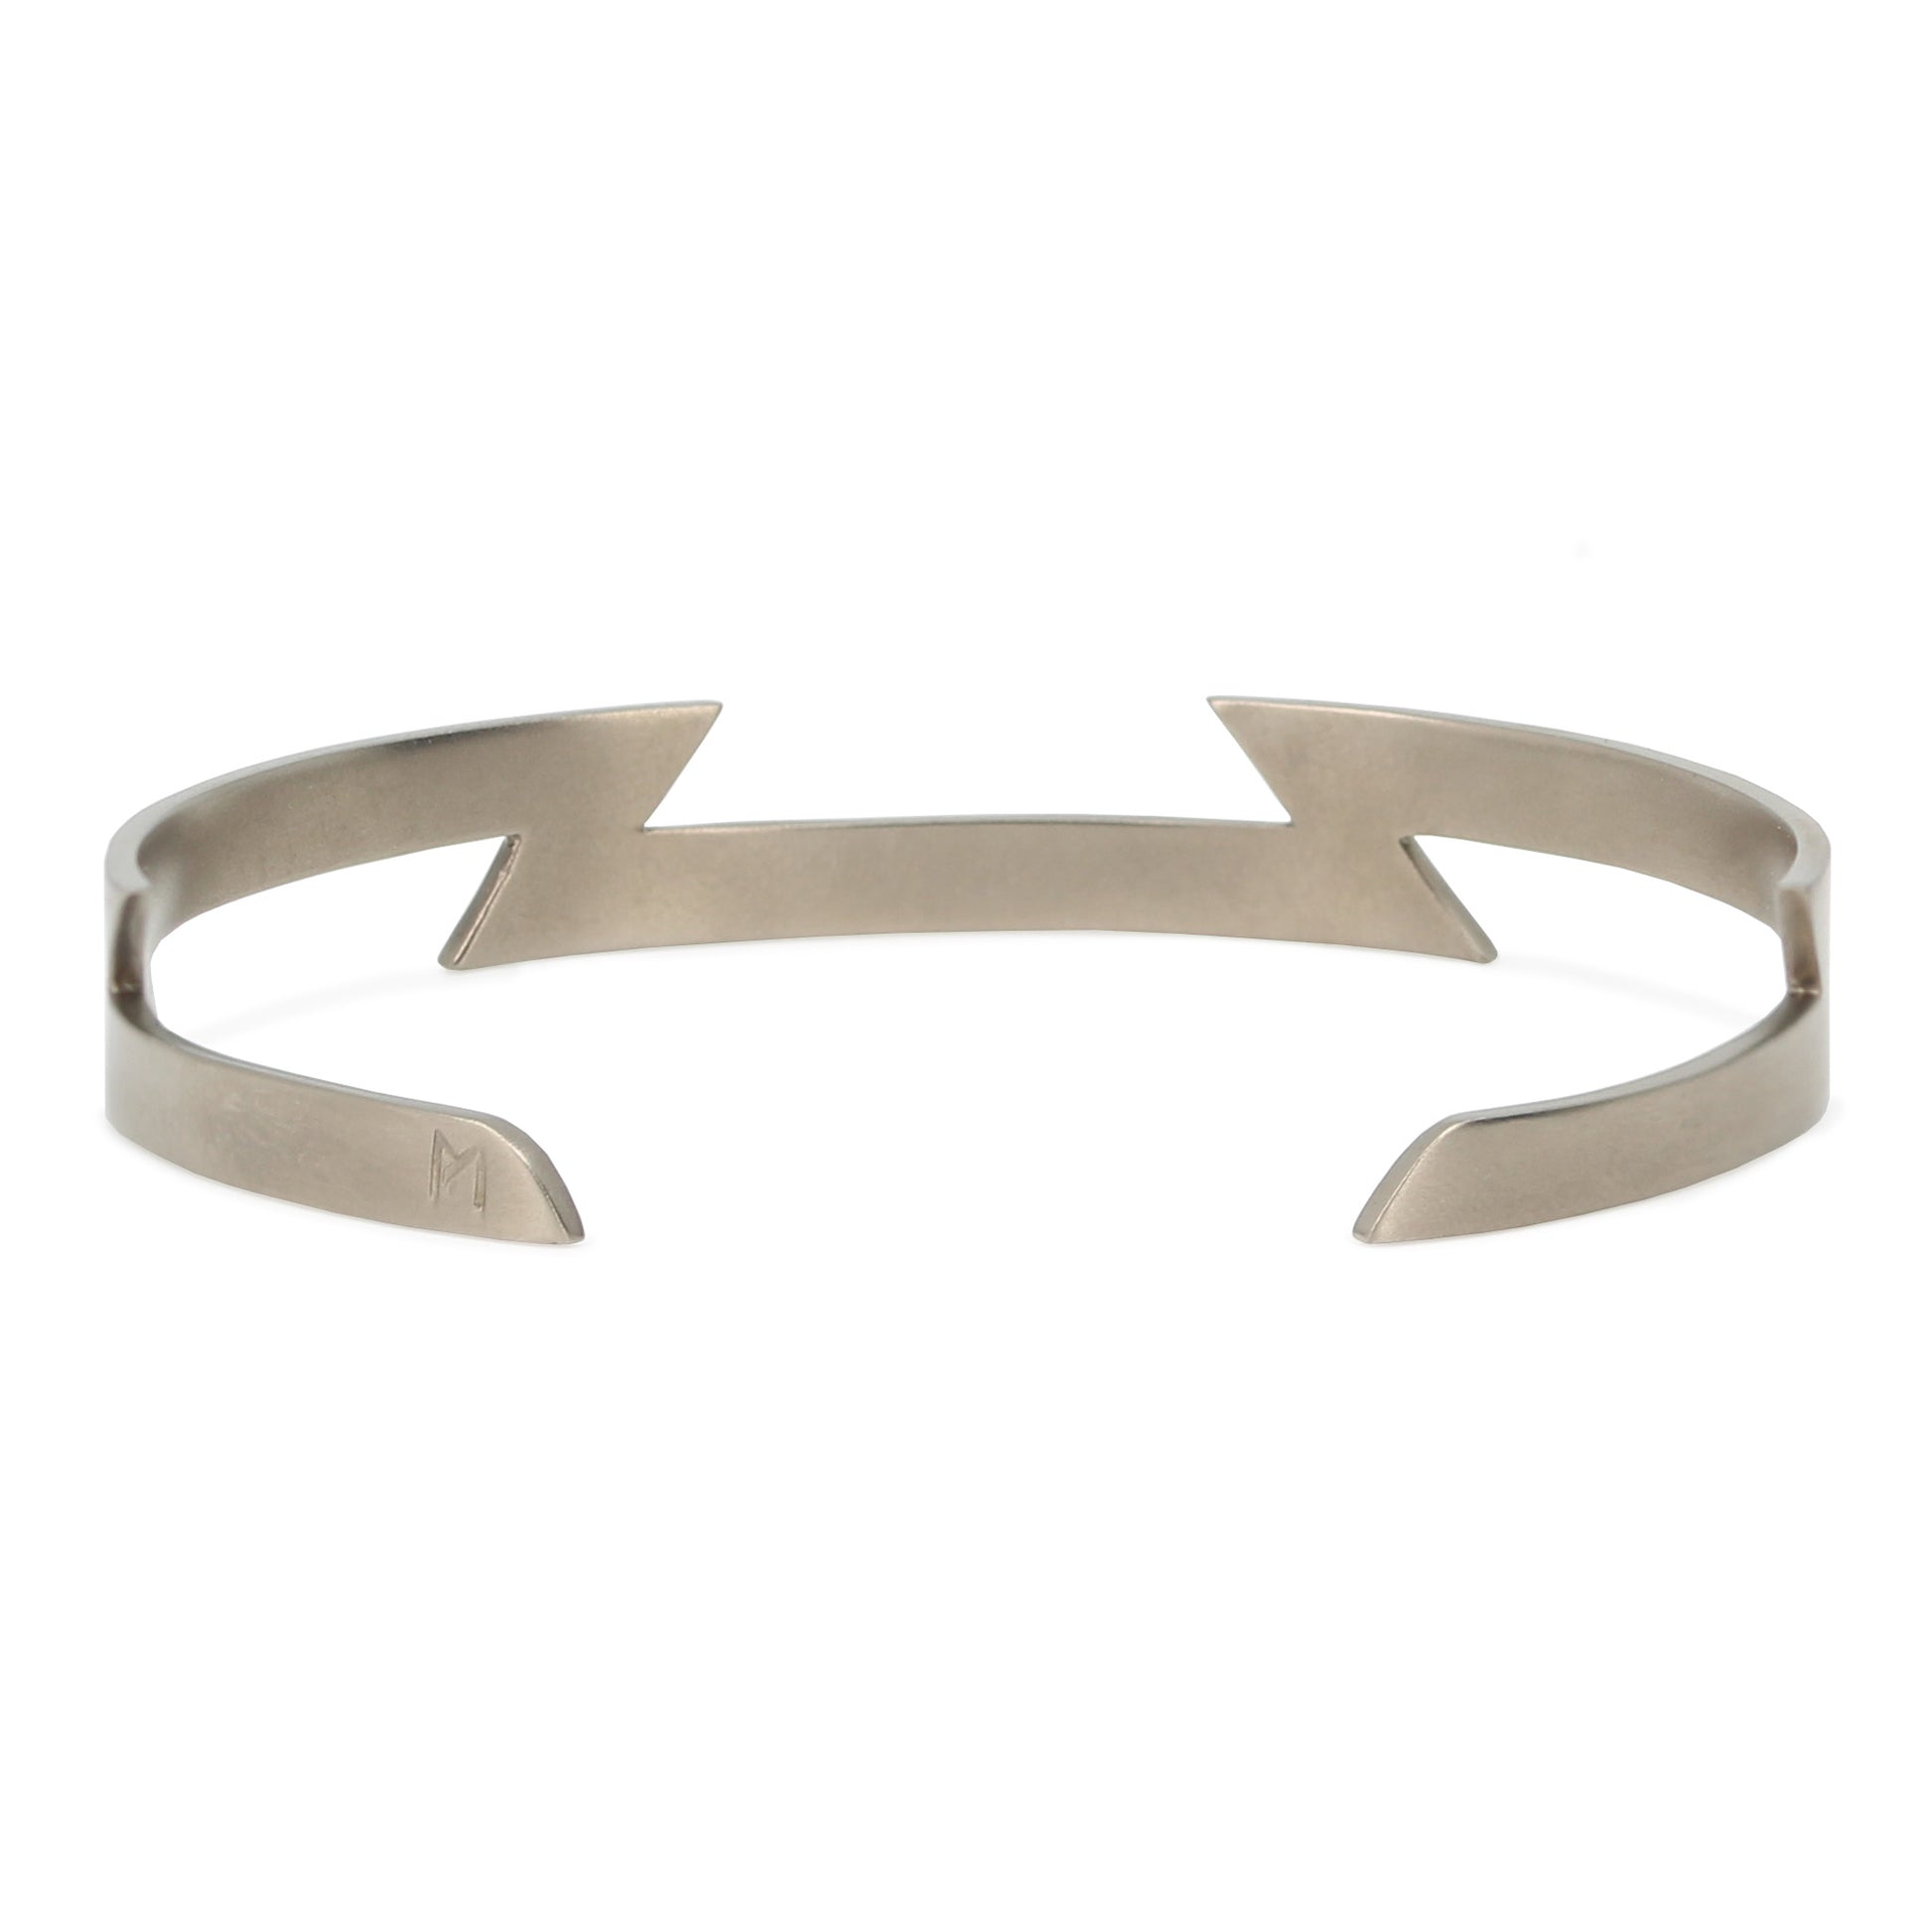 Top perspective of Maxwell Pontail's sleek titanium bracelet featuring sharp angles and a discreet 'M' engraving.